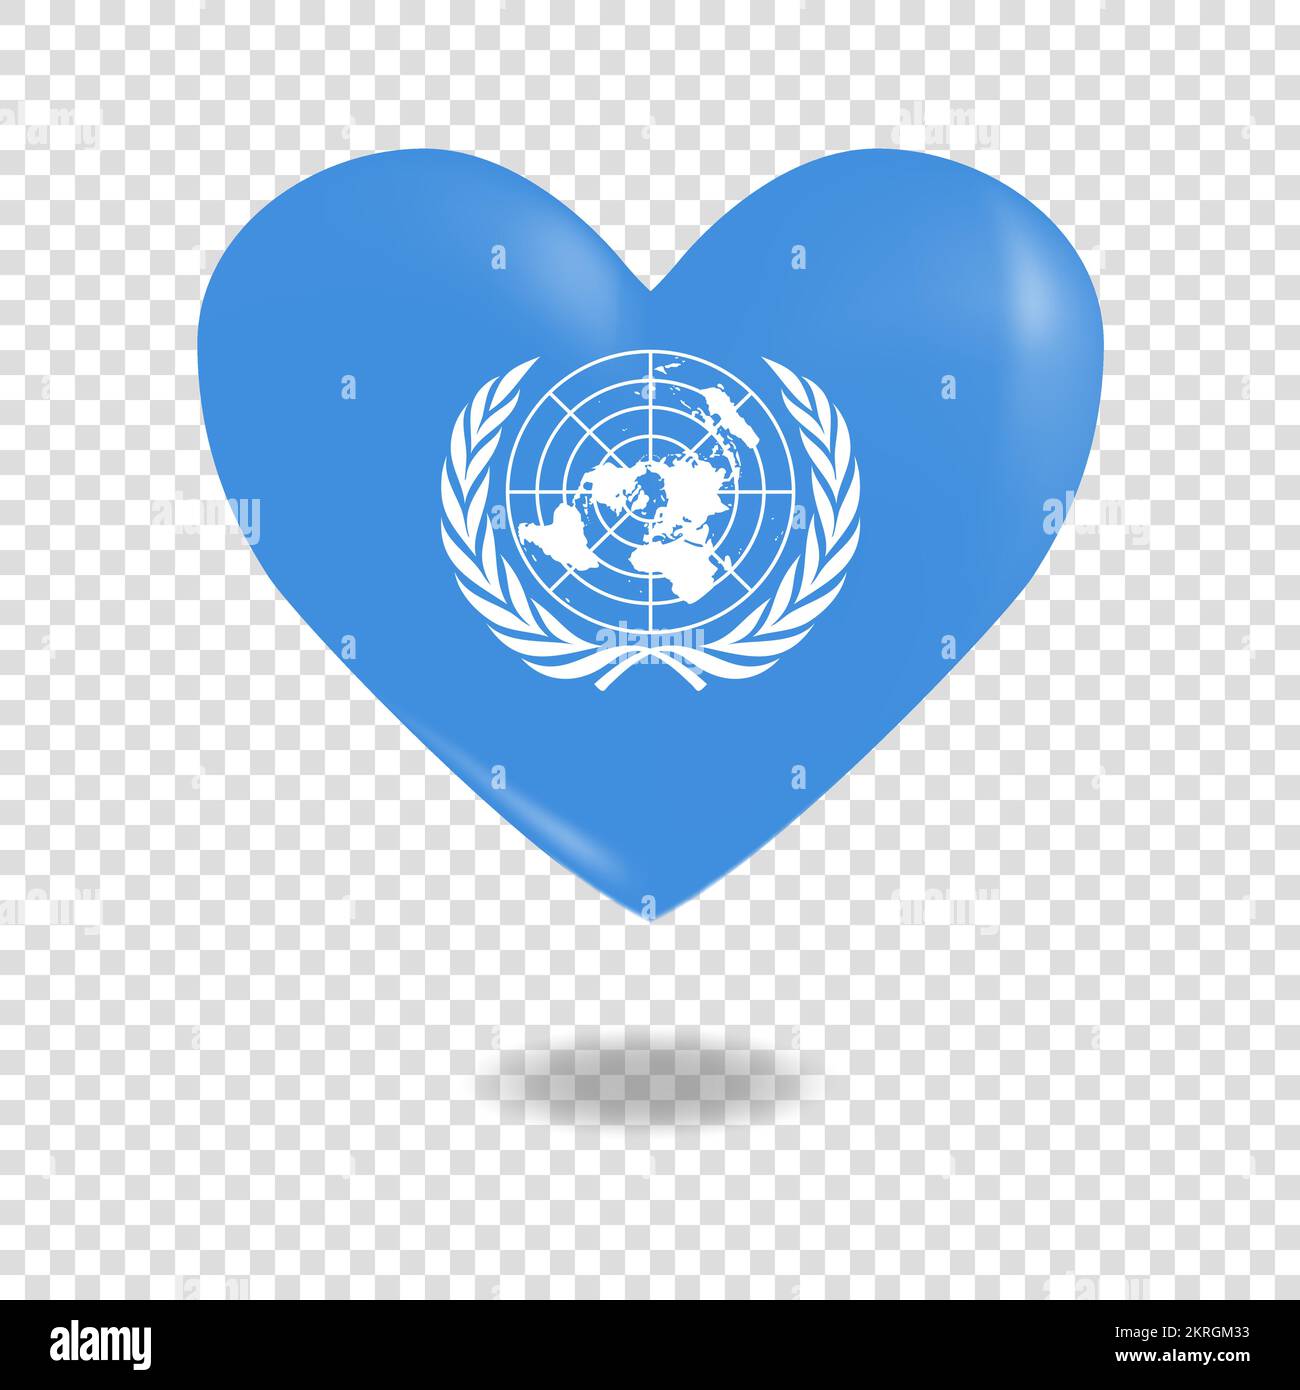 Volumetric heart of United Nations on checkered background denoting transparency, vector image Stock Vector